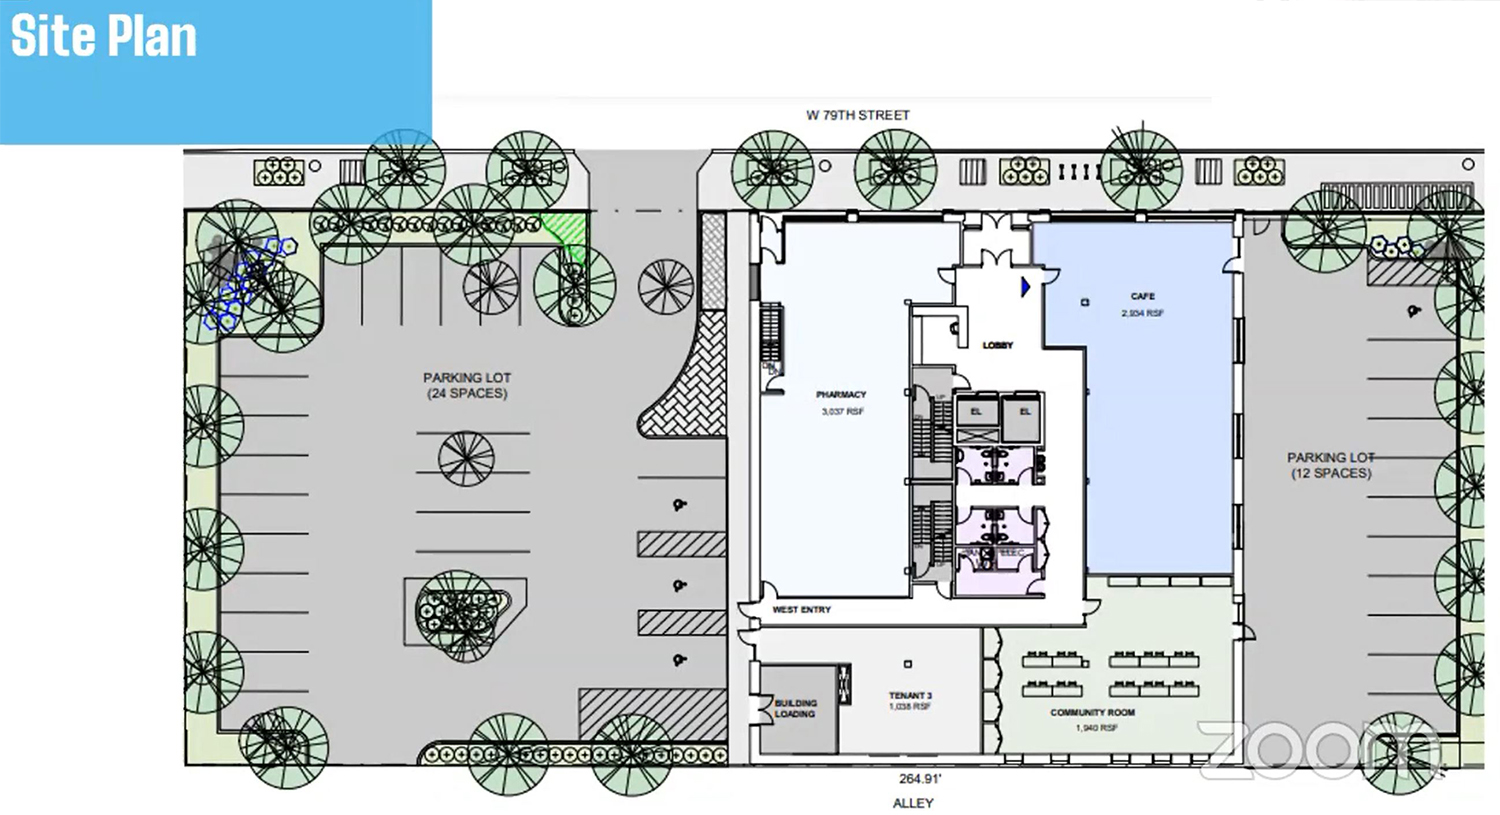 839 W 79th Street Site Plan. Drawing by MKB Architects